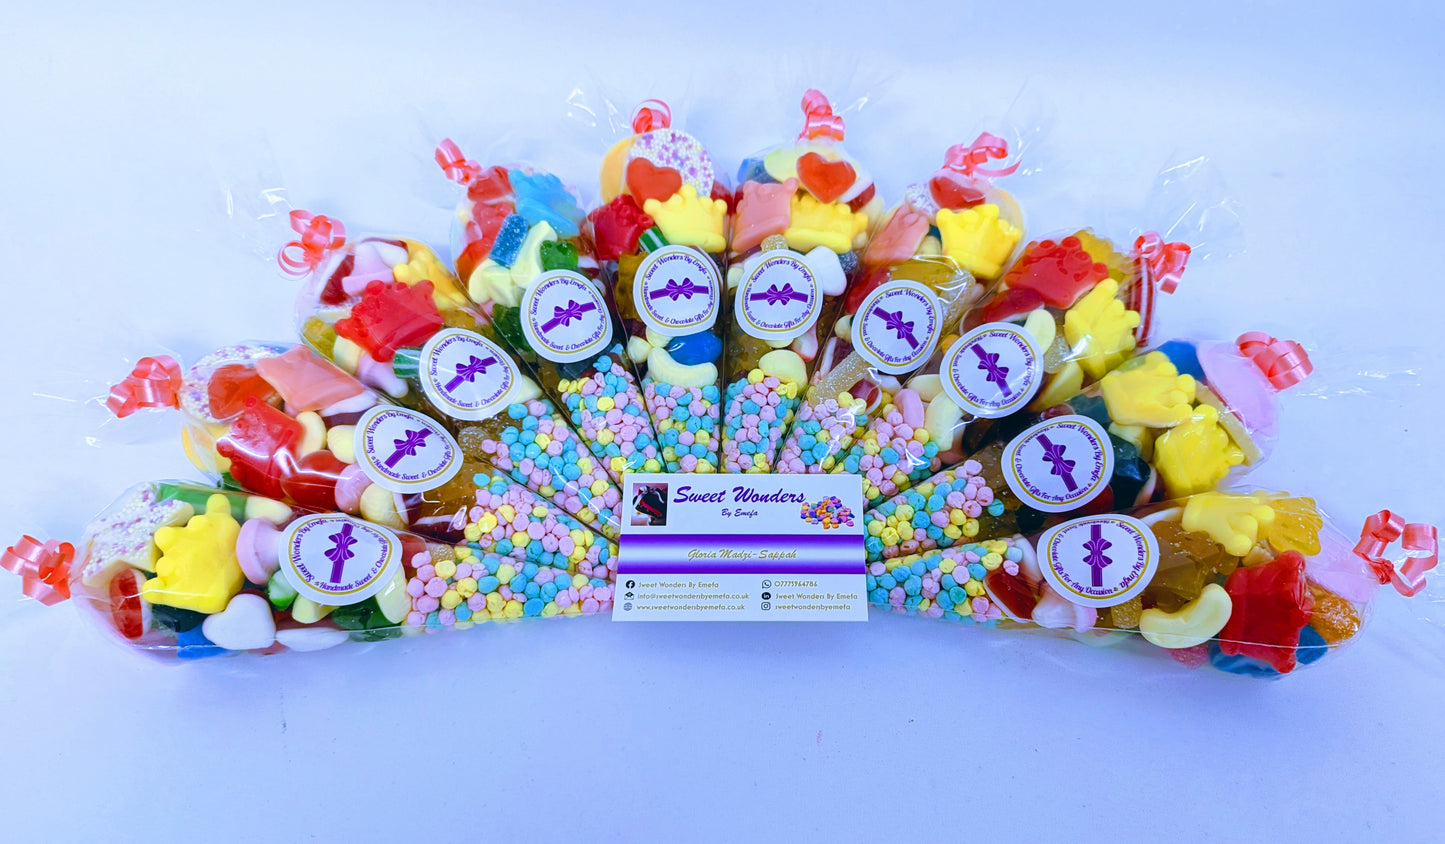 Premier Pick 'n' Mix Sweet Cones - No Marshmallows